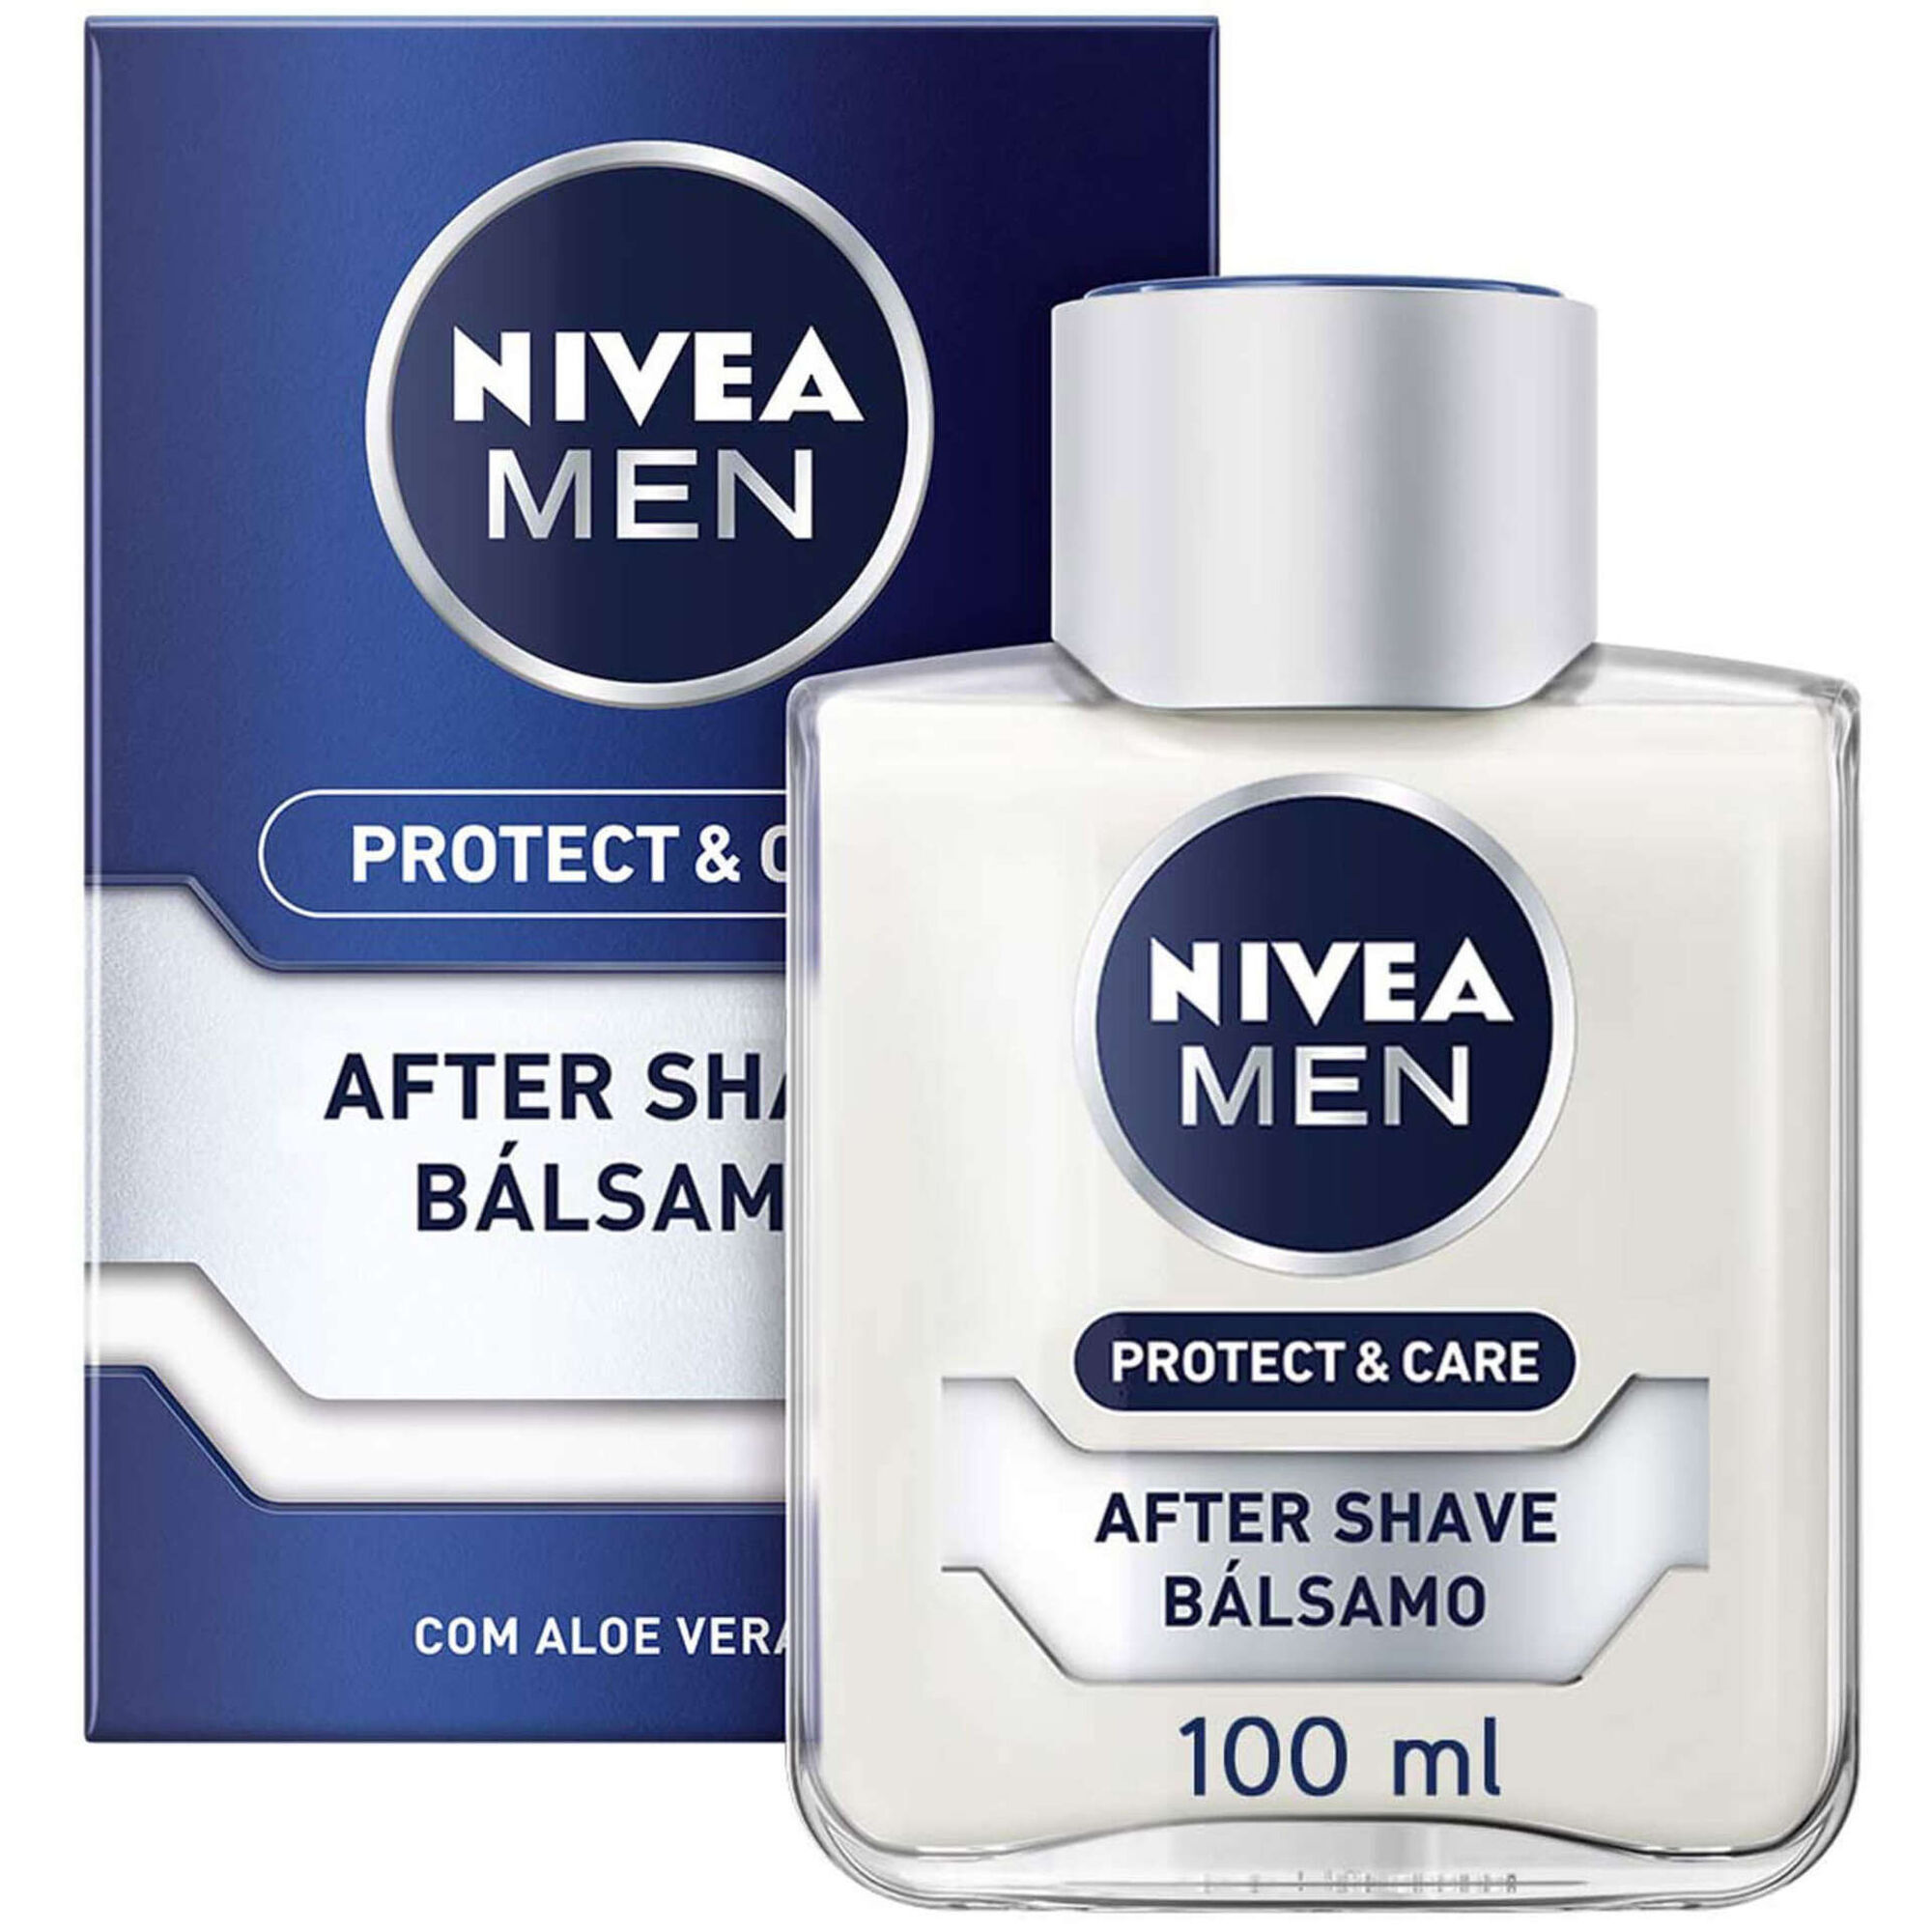 AFTER SHAVE NIVEA BÁLSAMO PROTECT & CARE 100ML